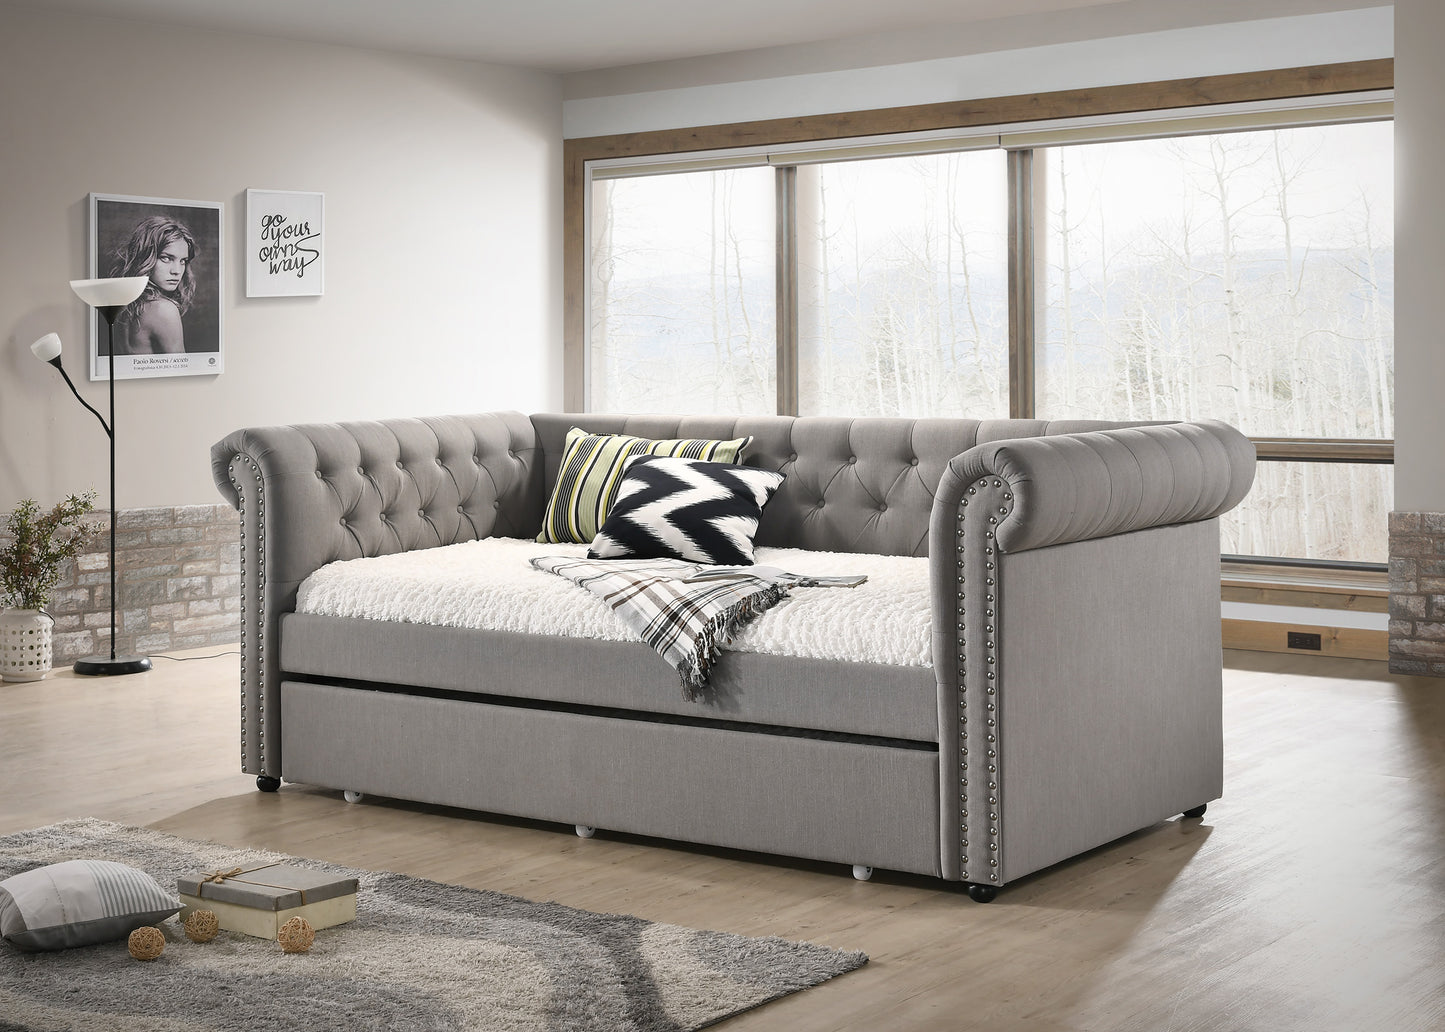 Gray Rolled Arm Trundle Daybed